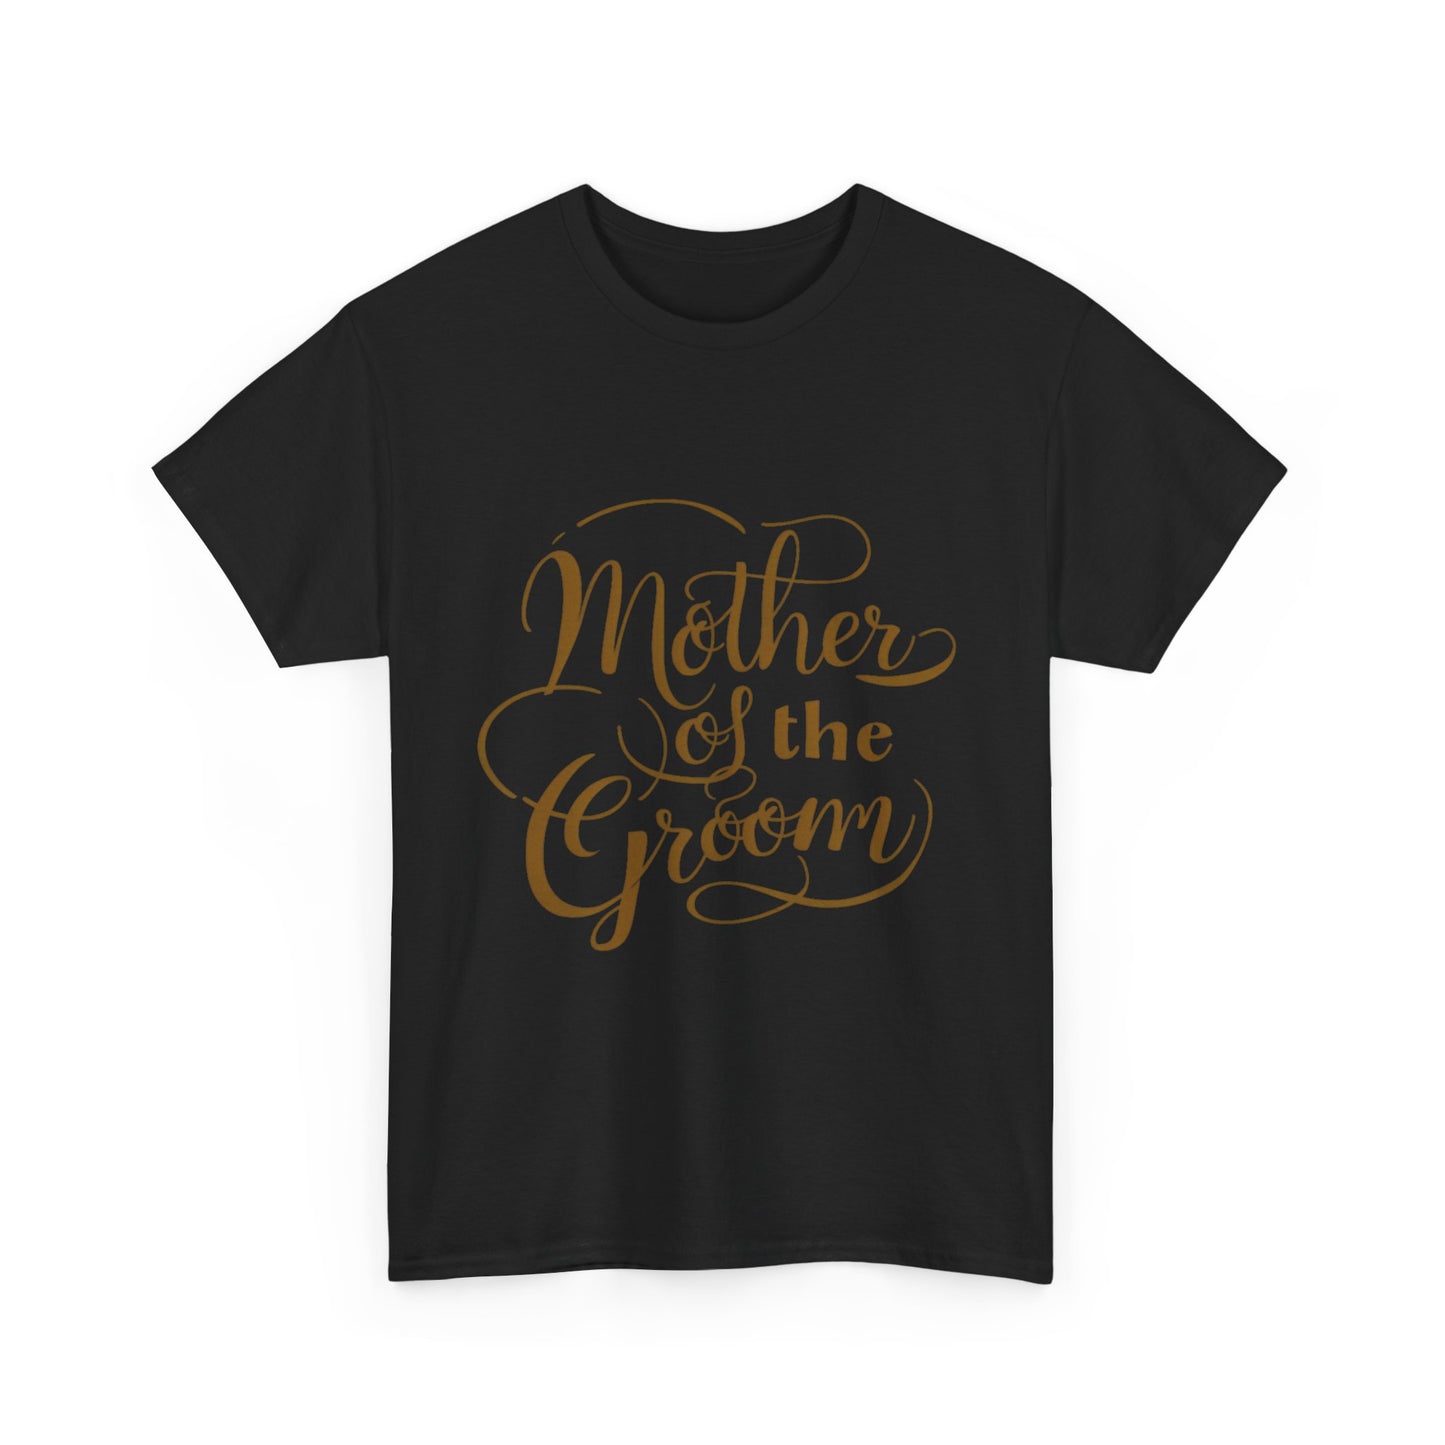 Mother of the Groom Shirt